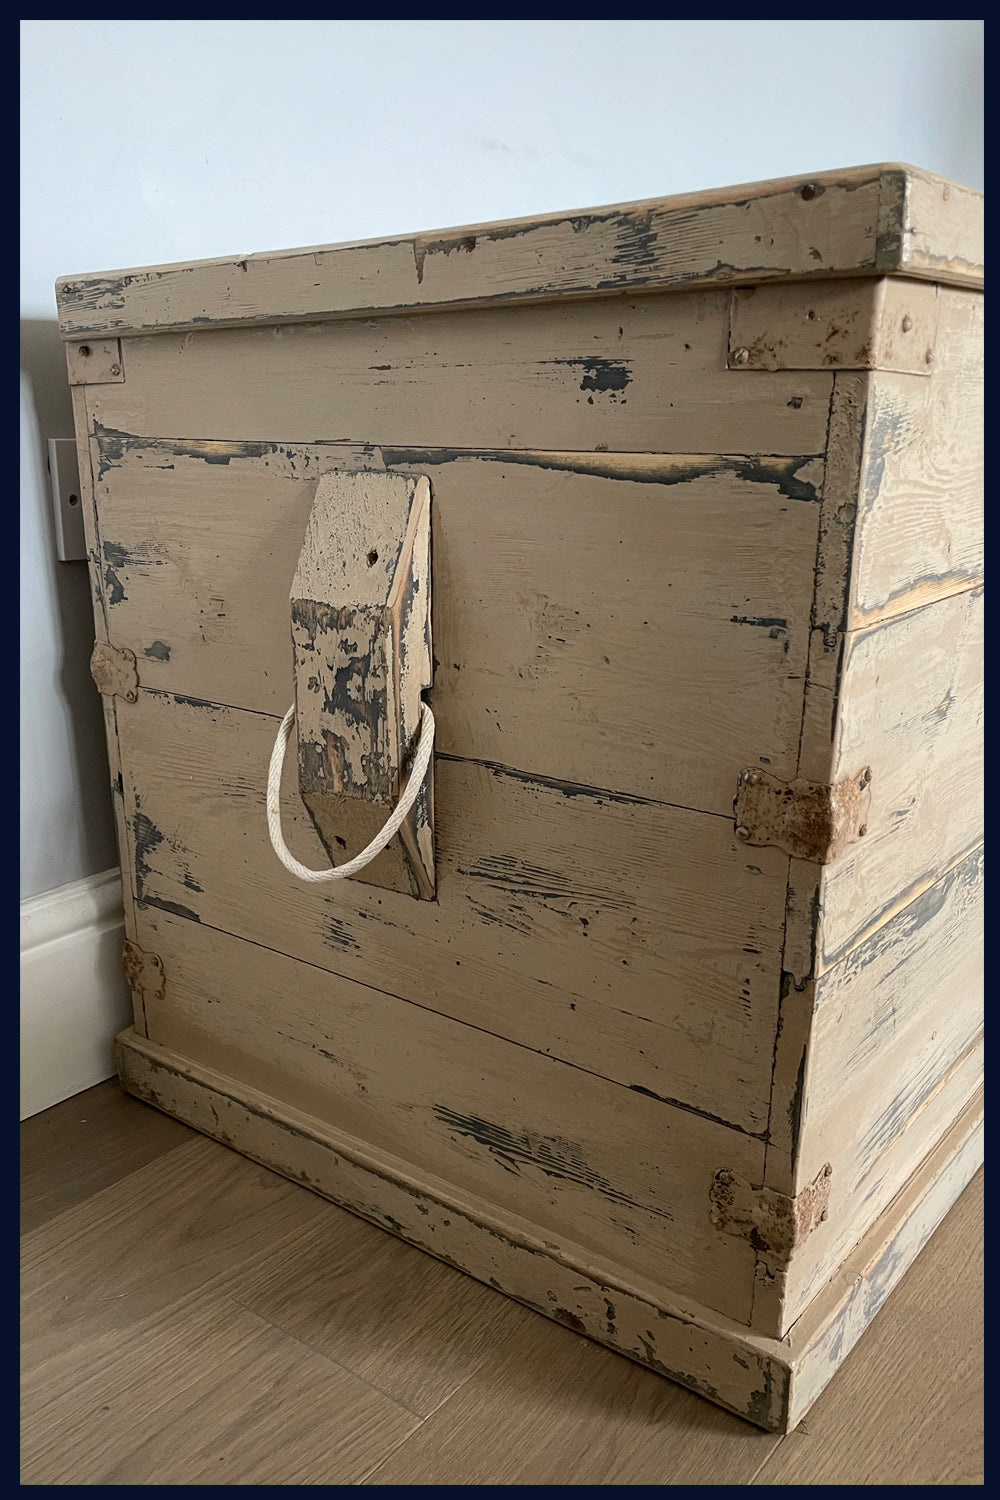 REDUCED Wonderland Furniture Collection: Large Vintage Distressed Paint Wooden Trunk/Box